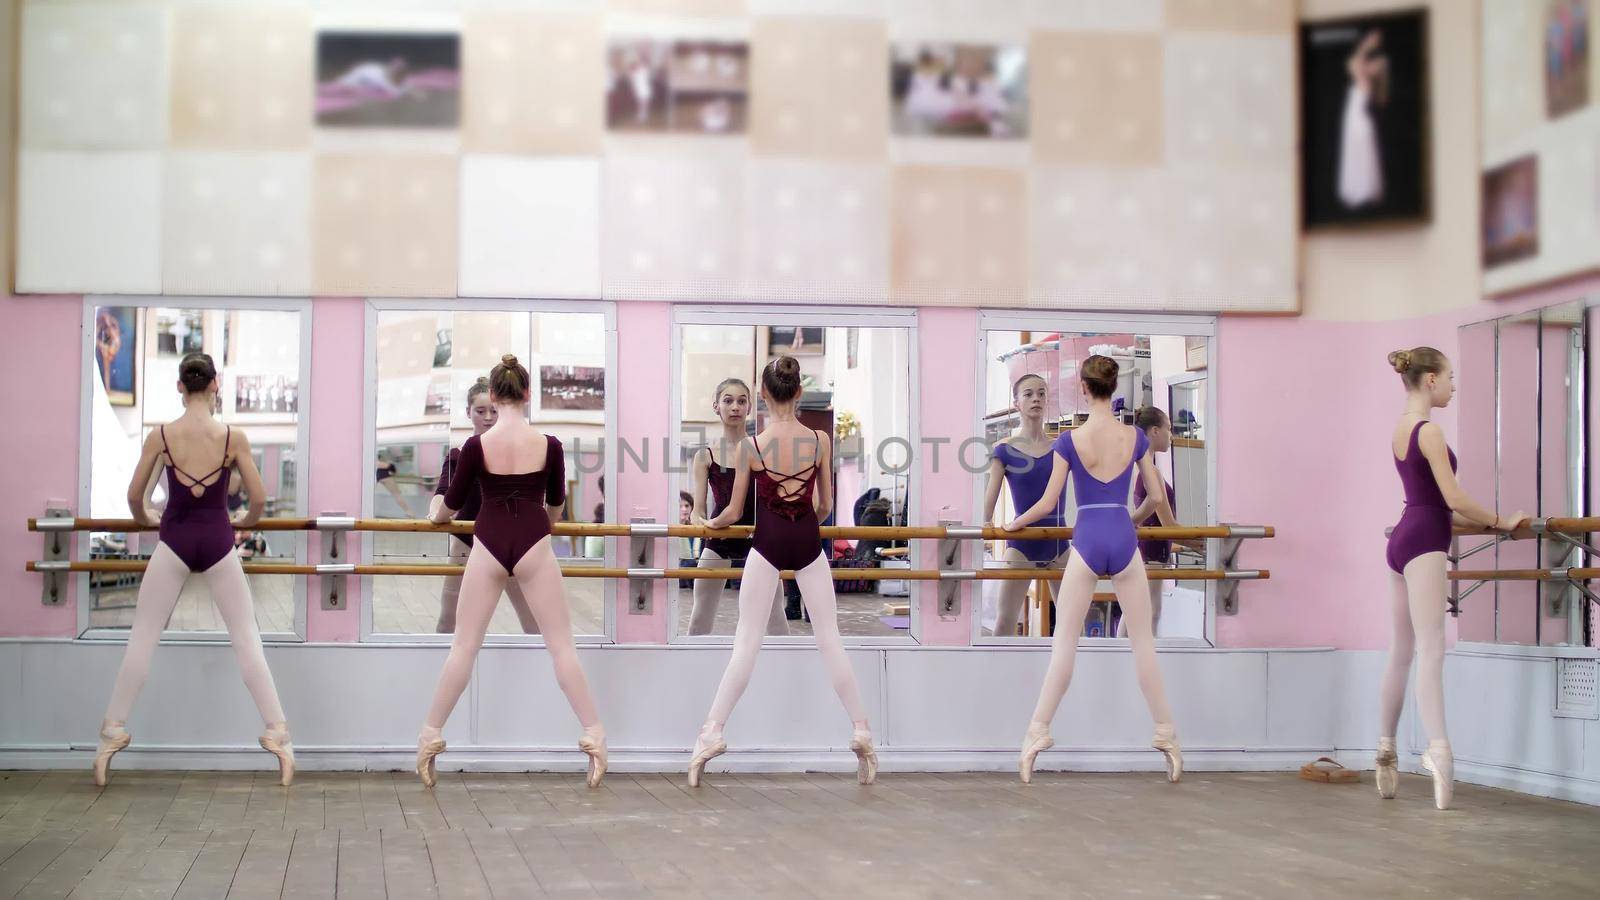 in ballet hall, Young ballerinas in purple leotards perform pas eshappe, going up, standing on toes in pointe shoes at railing in ballet hall by djtreneryay